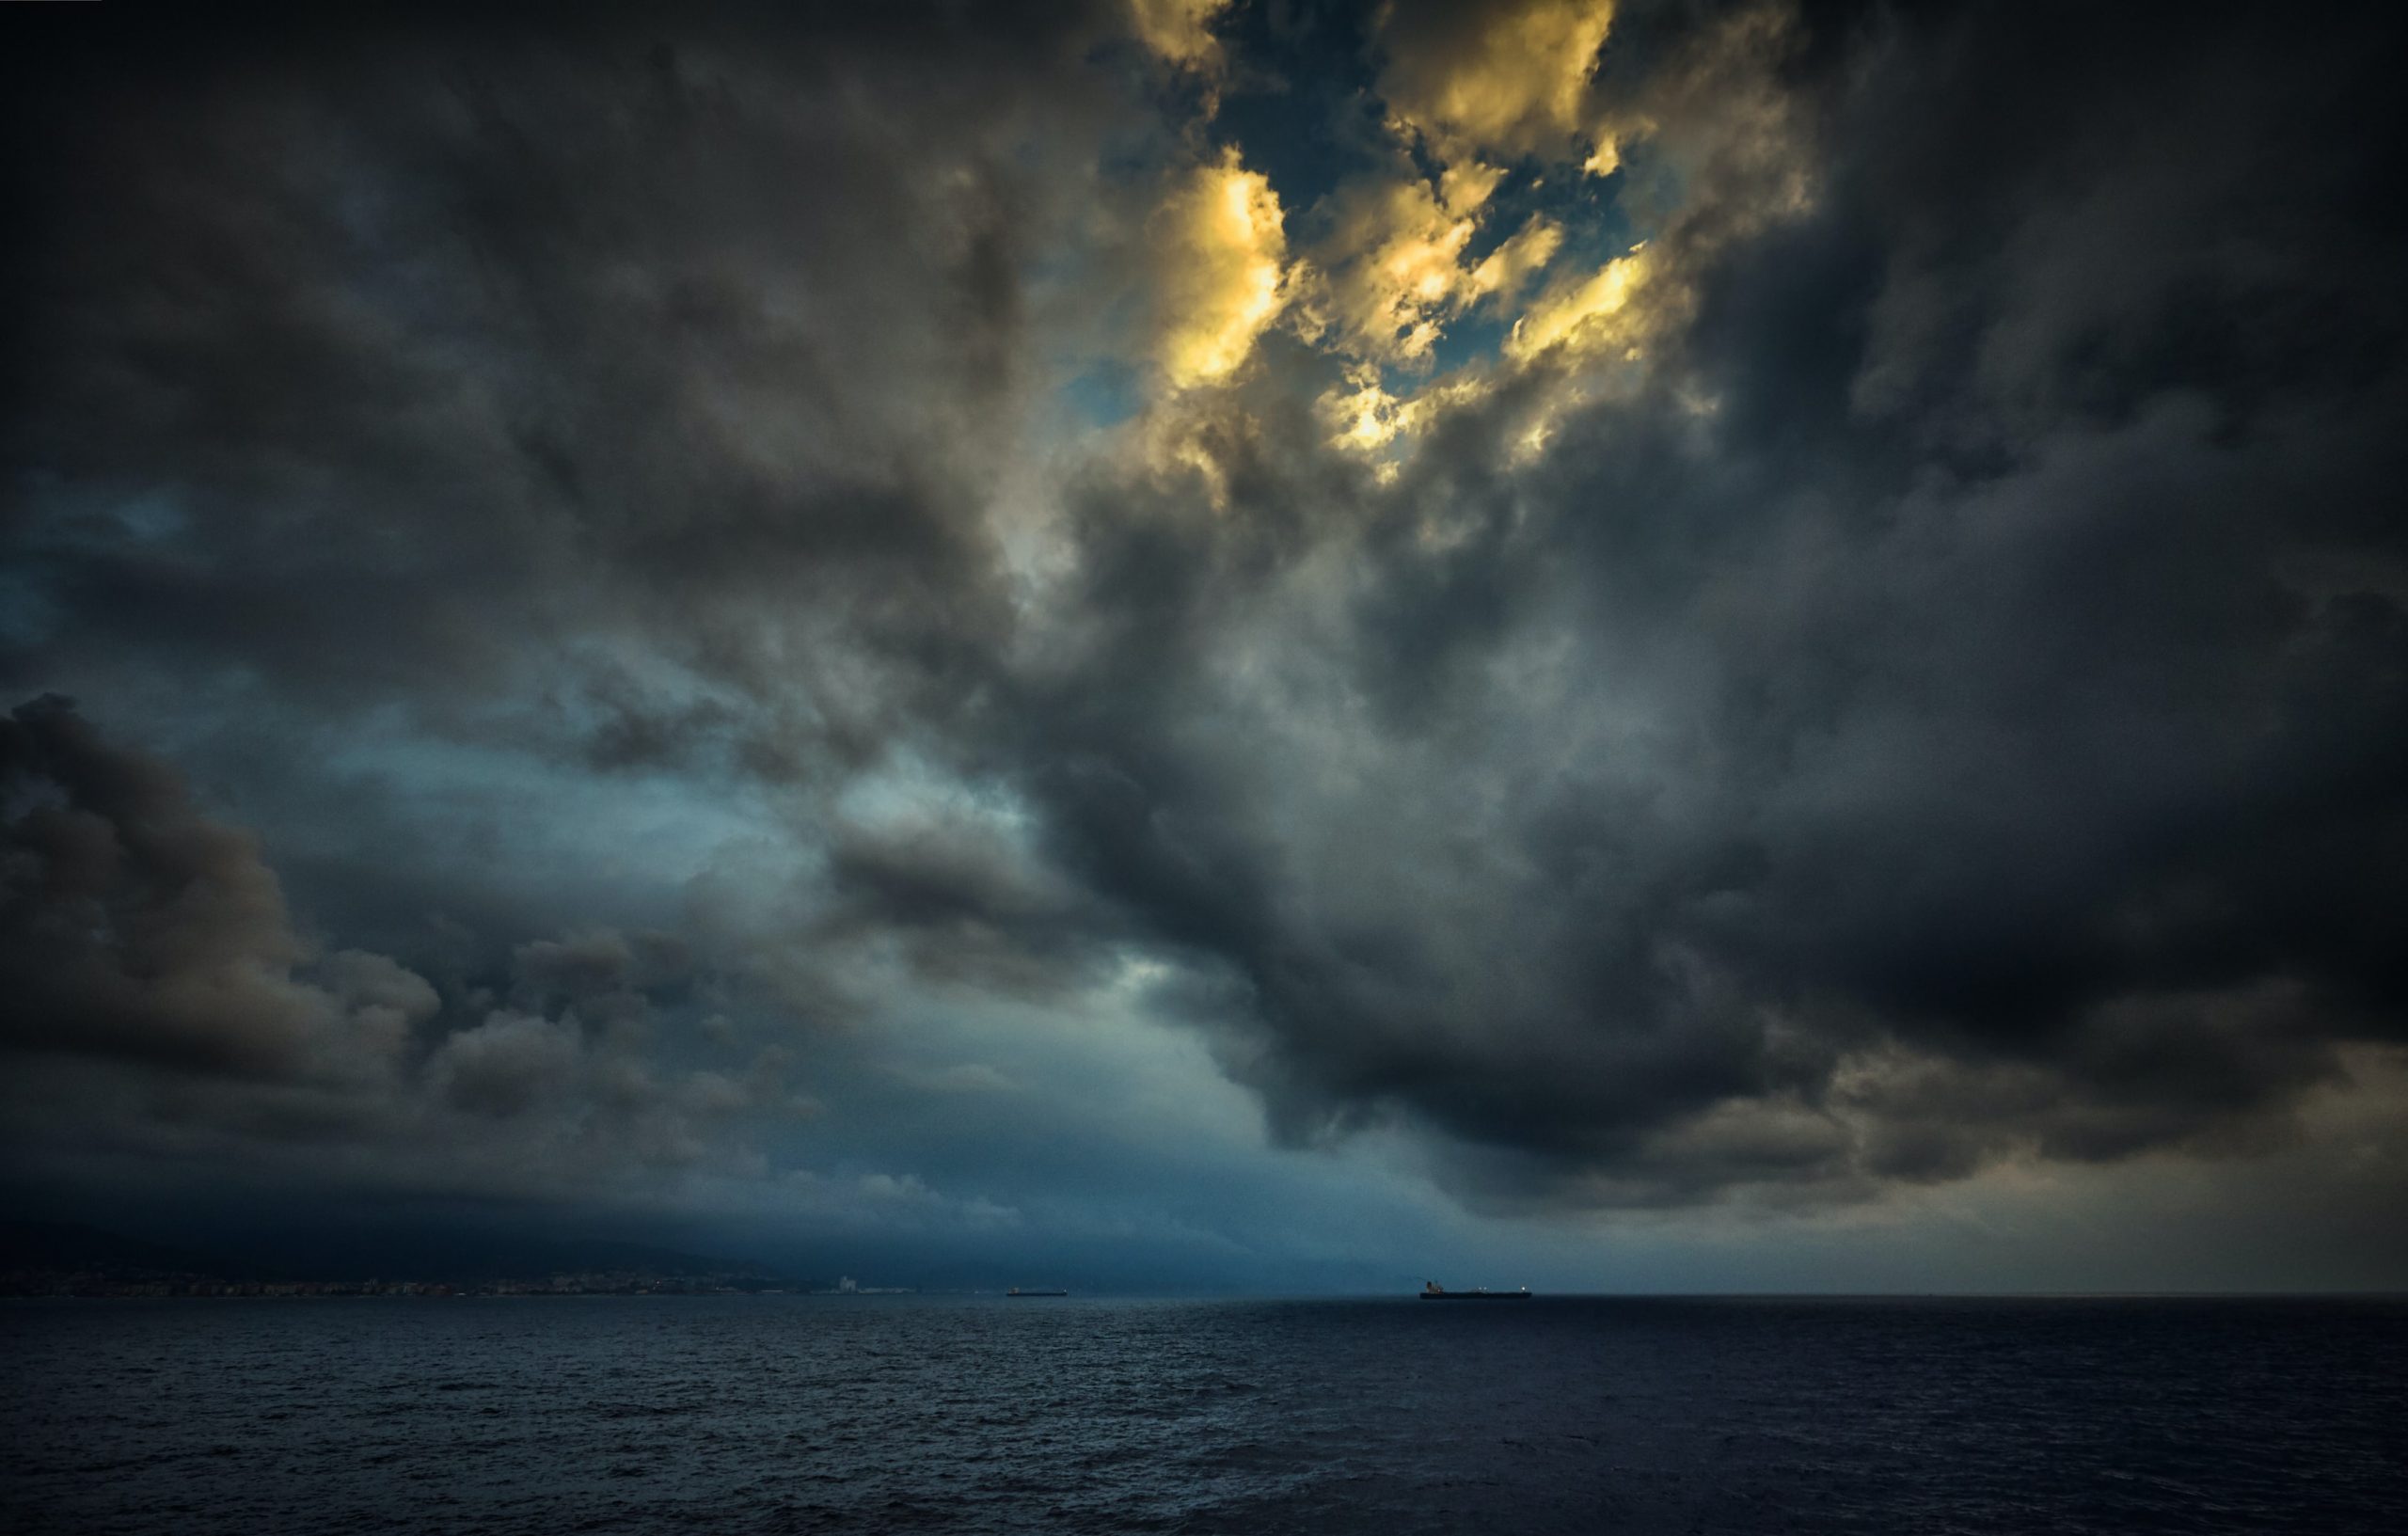 A photograph of a midnight black, calm ocean. Above, the sky is a dark blue and is filled with smoky grey storm clouds. In the centre of the cloud cluster, a hopeful spot of sunshine peeks through.